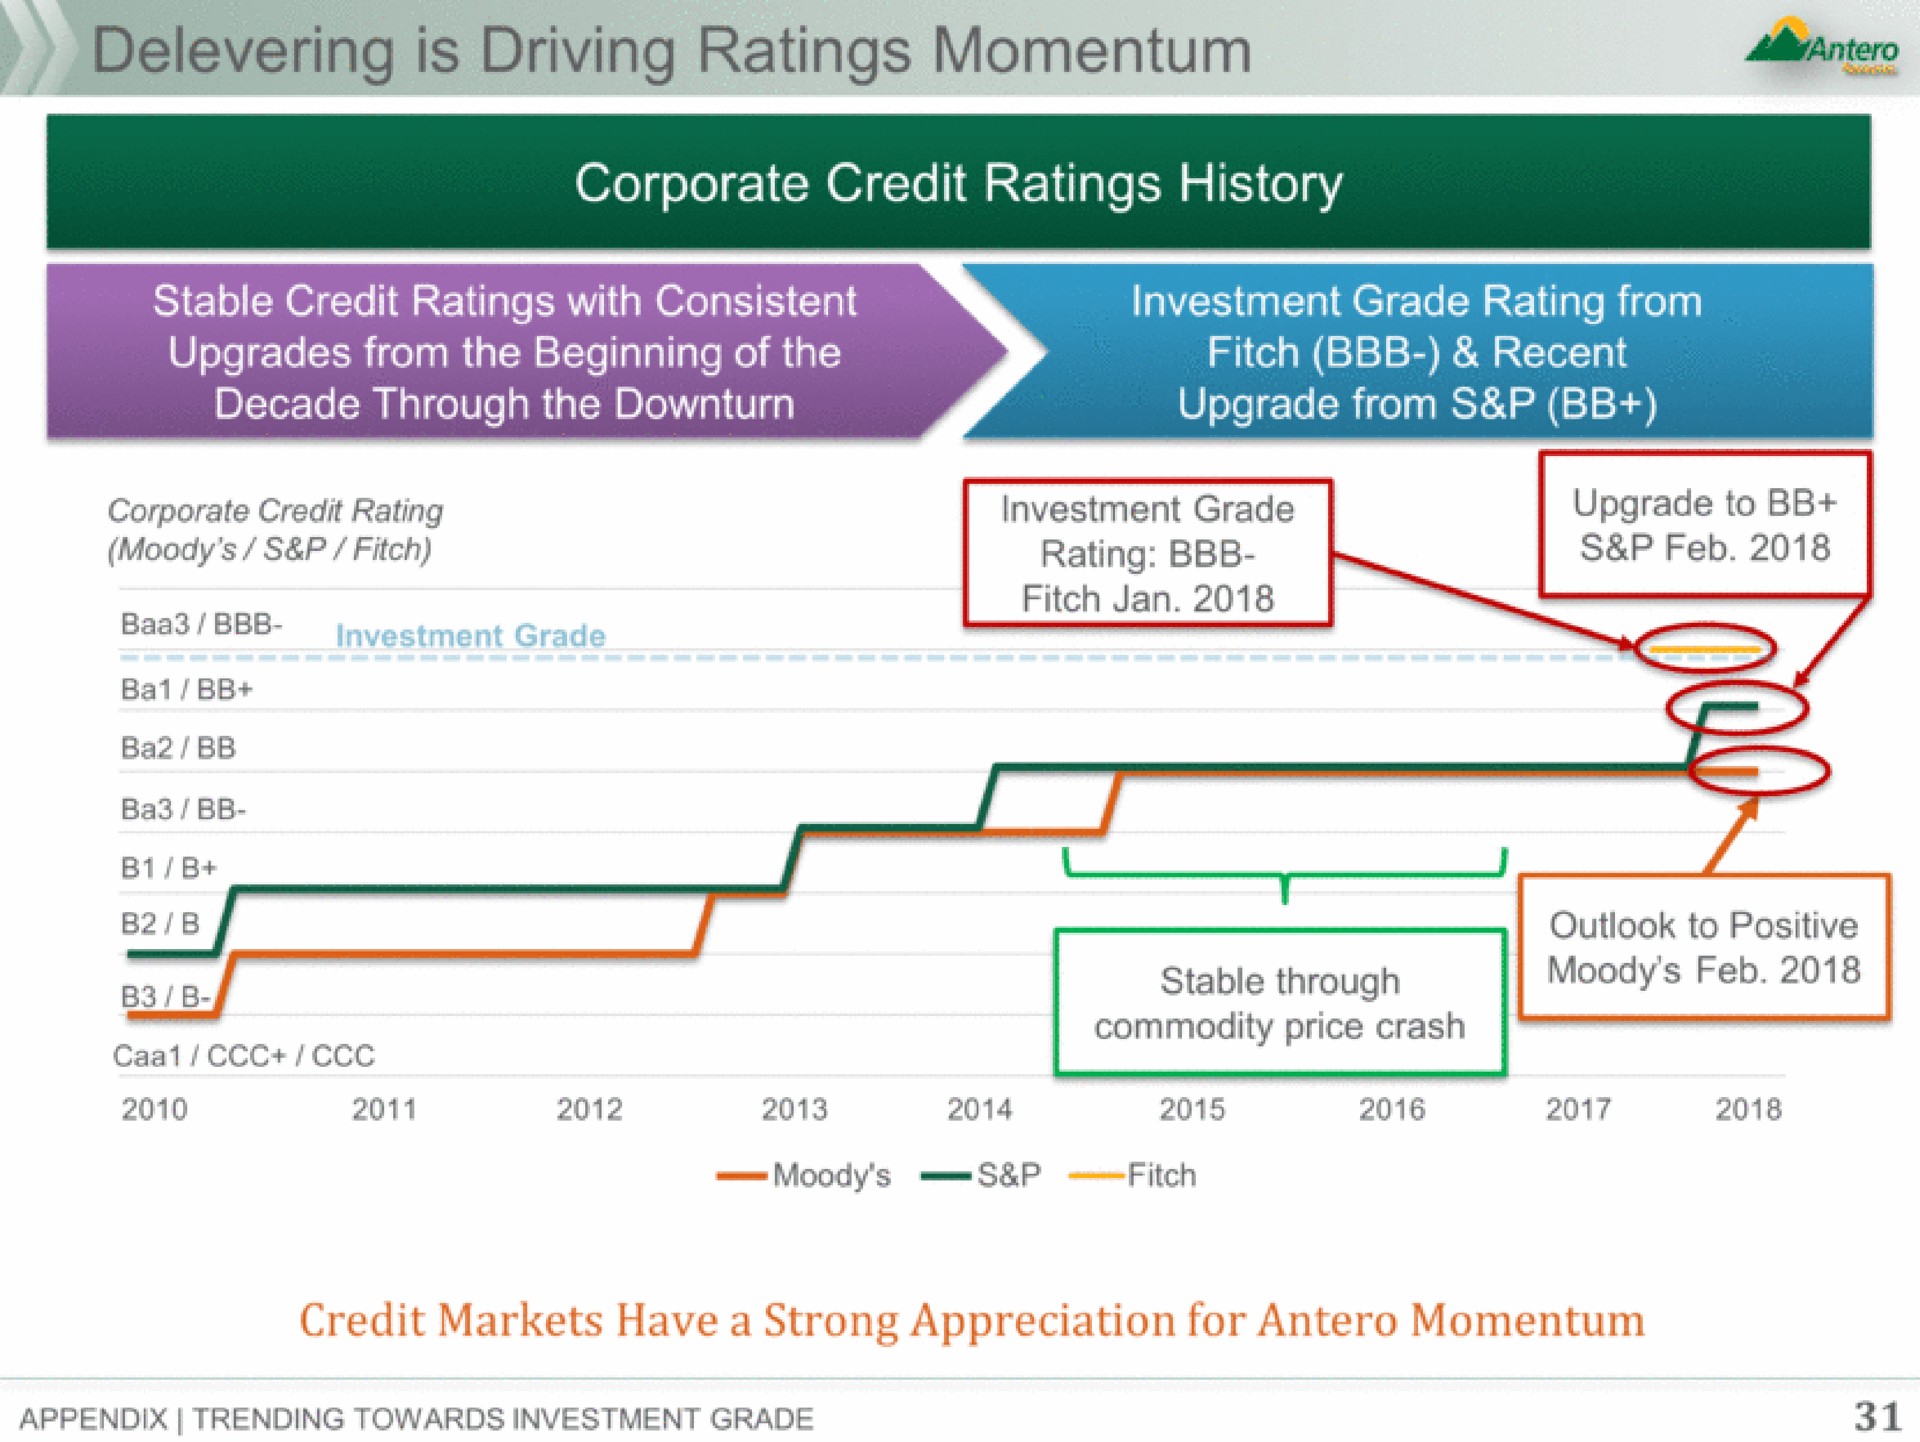 levering is driving ratings momentum corporate credit ratings history | Antero Midstream Partners